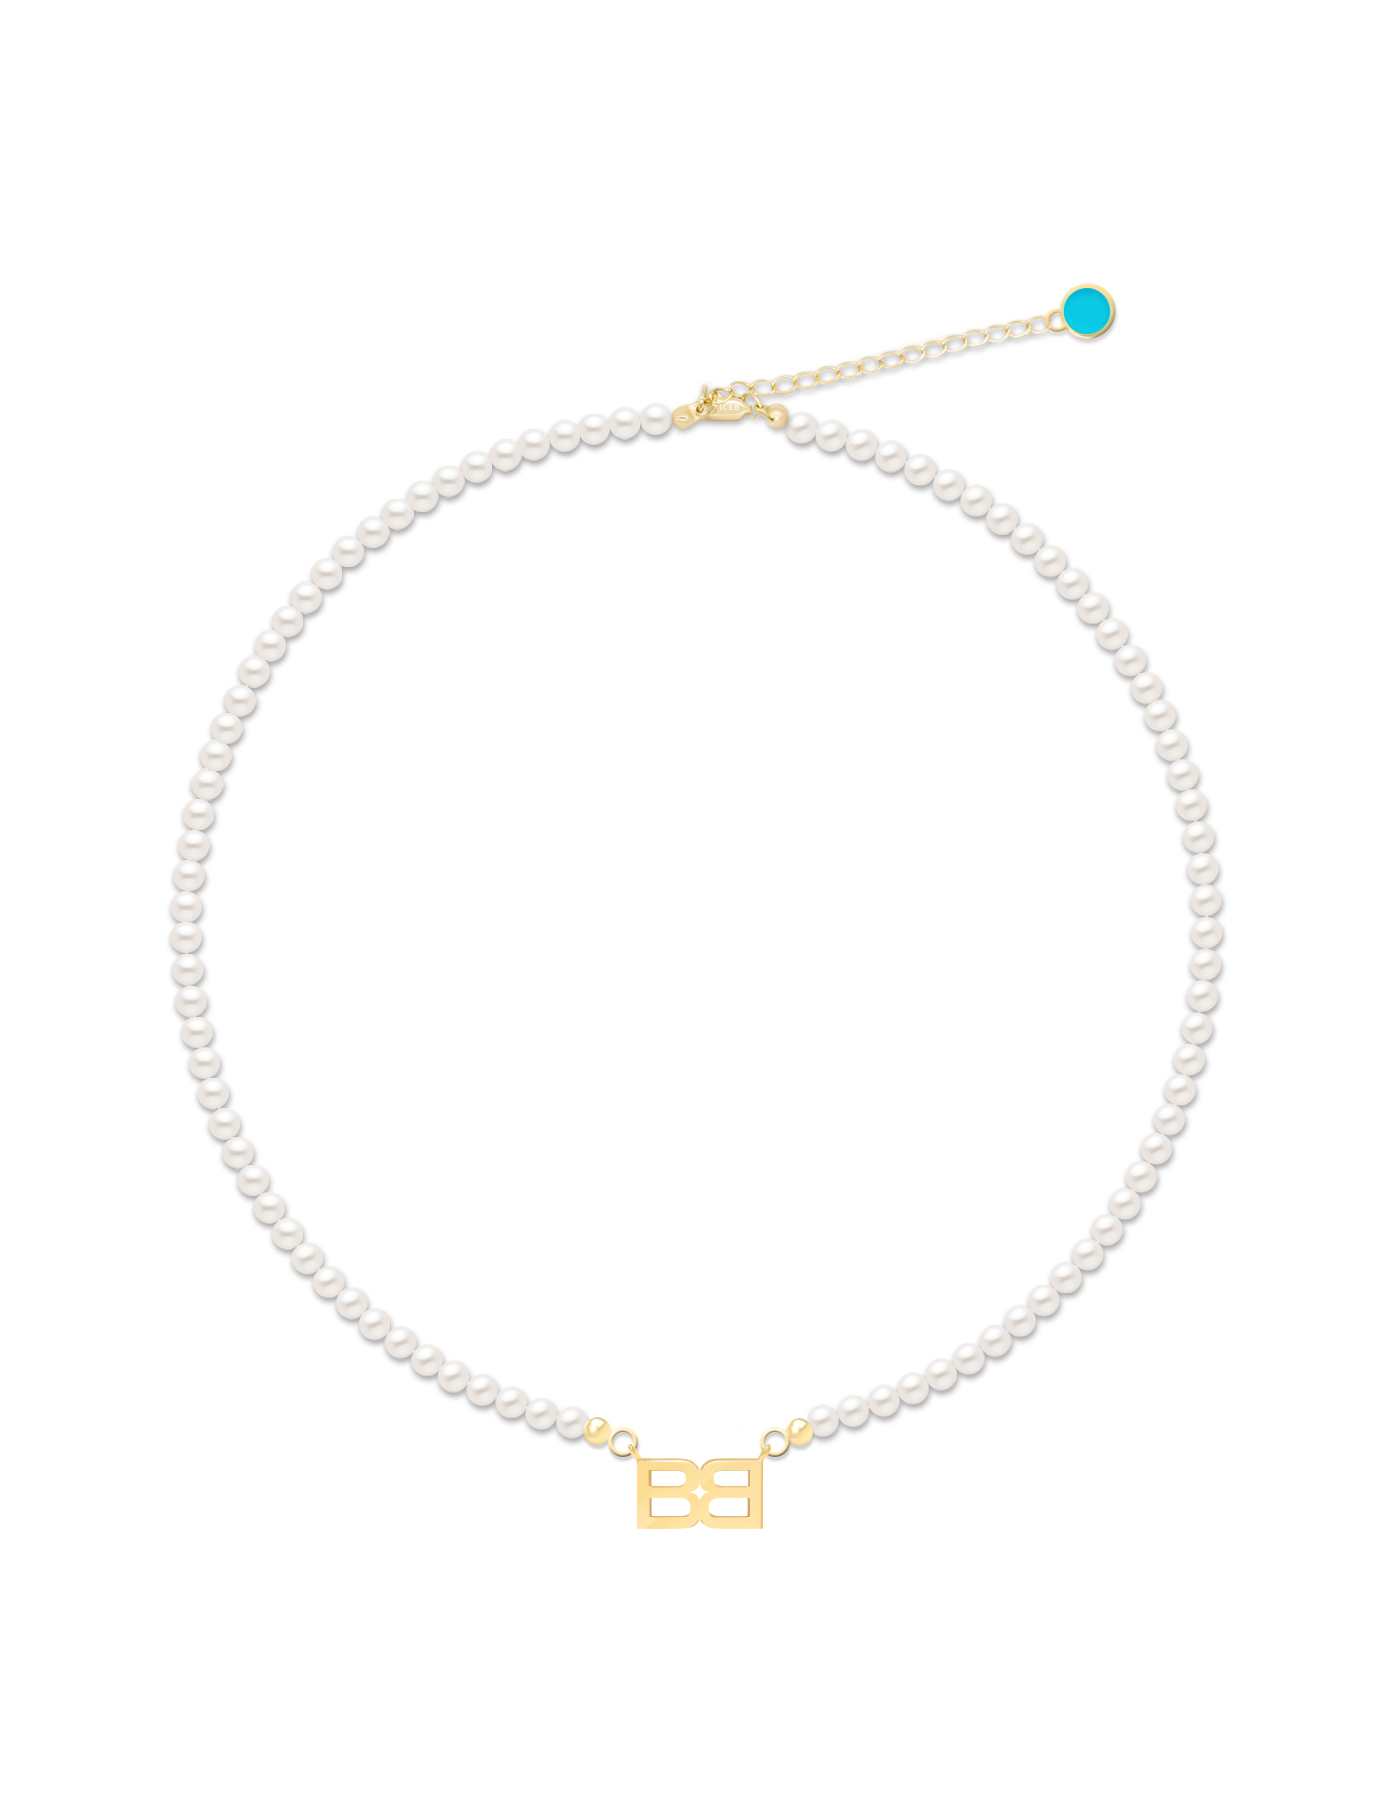 BB pearl necklace (White)